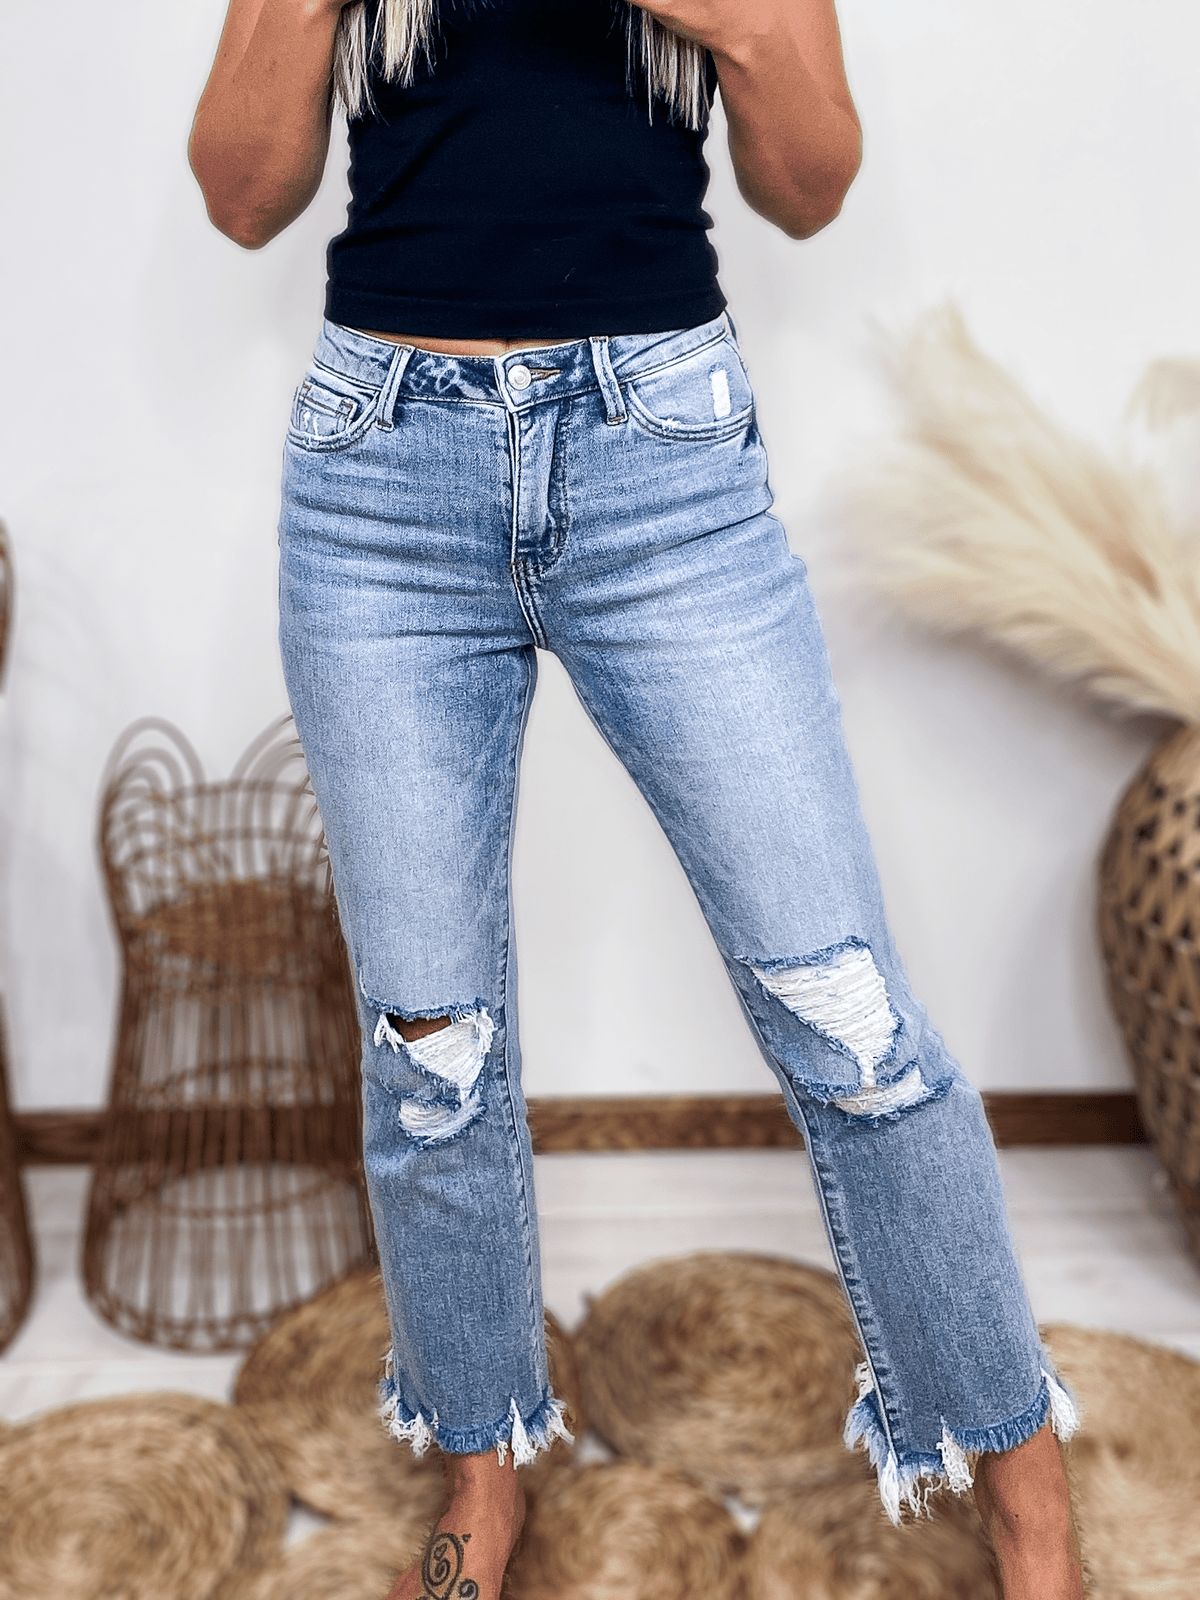 High Rise Cropped Flare Jeans Distressed with Frayed Hem Comfort Stretch Denim Lovervet by Vervet 90% Cotton, 8% Polyester, 2% Spandex 10" Rise, 27" Inseam